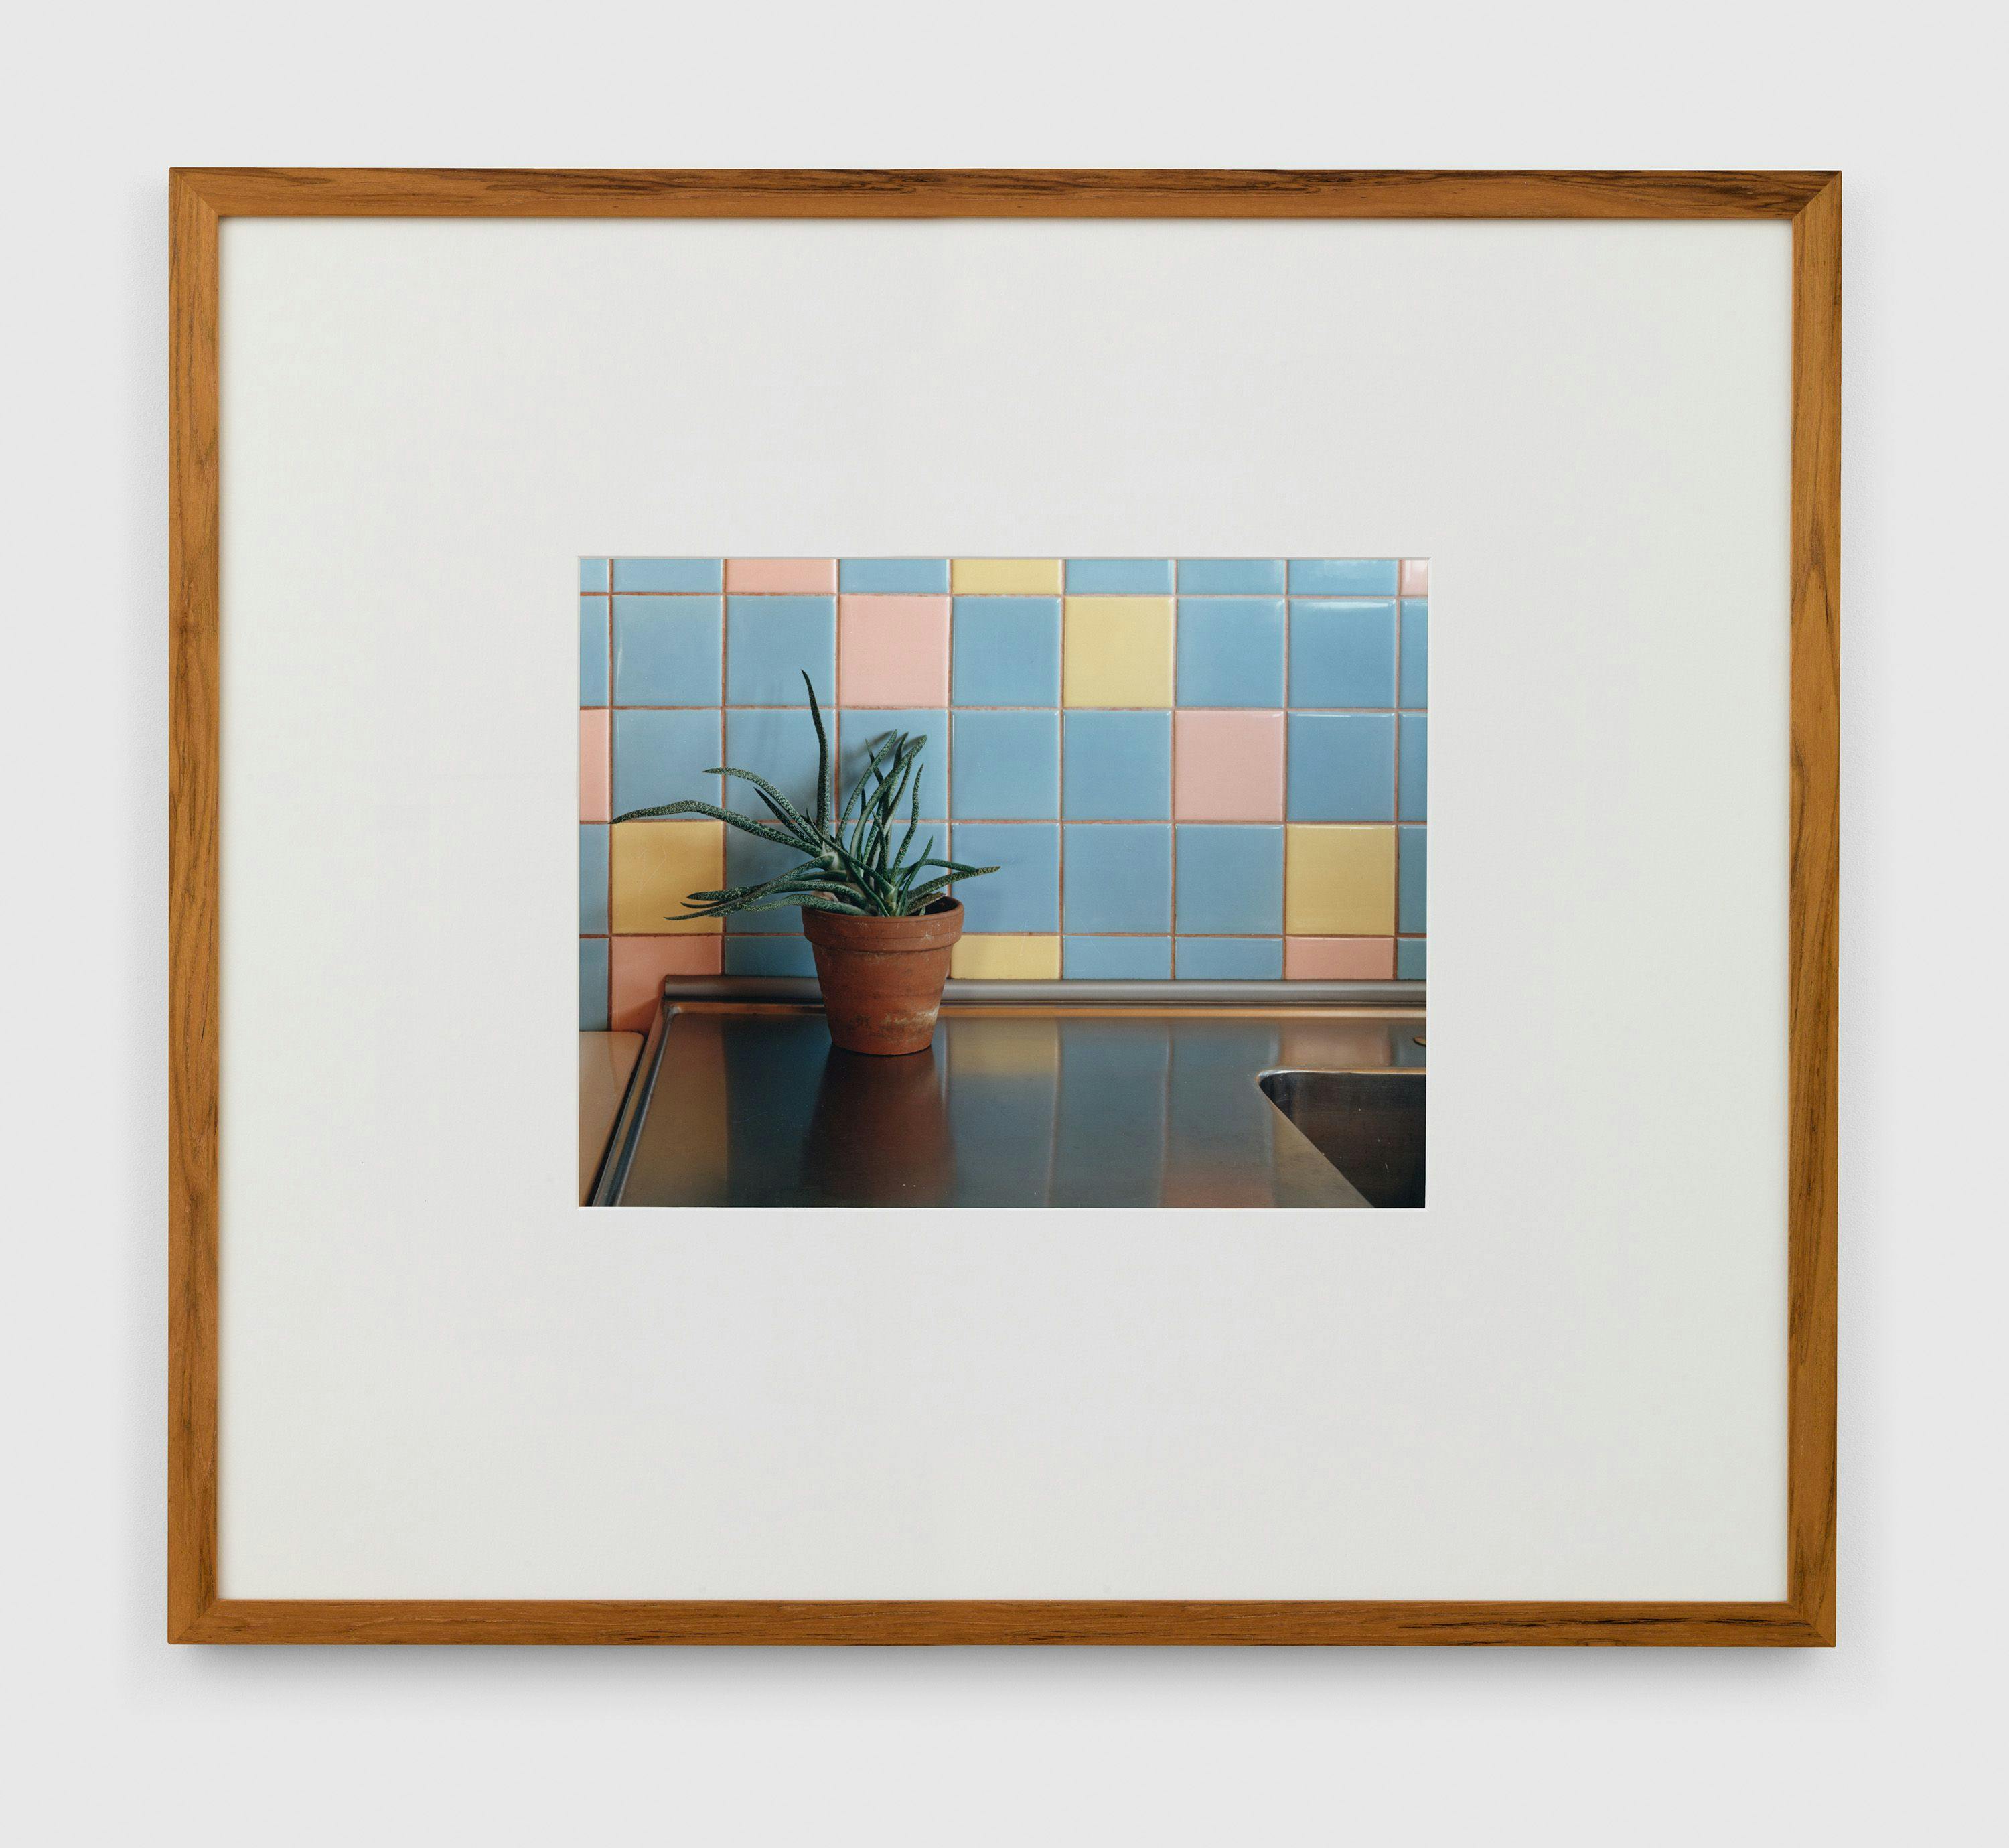 A chromogenic print with Diasec by Thomas Ruff, titled Interior 1D, dated 1982.